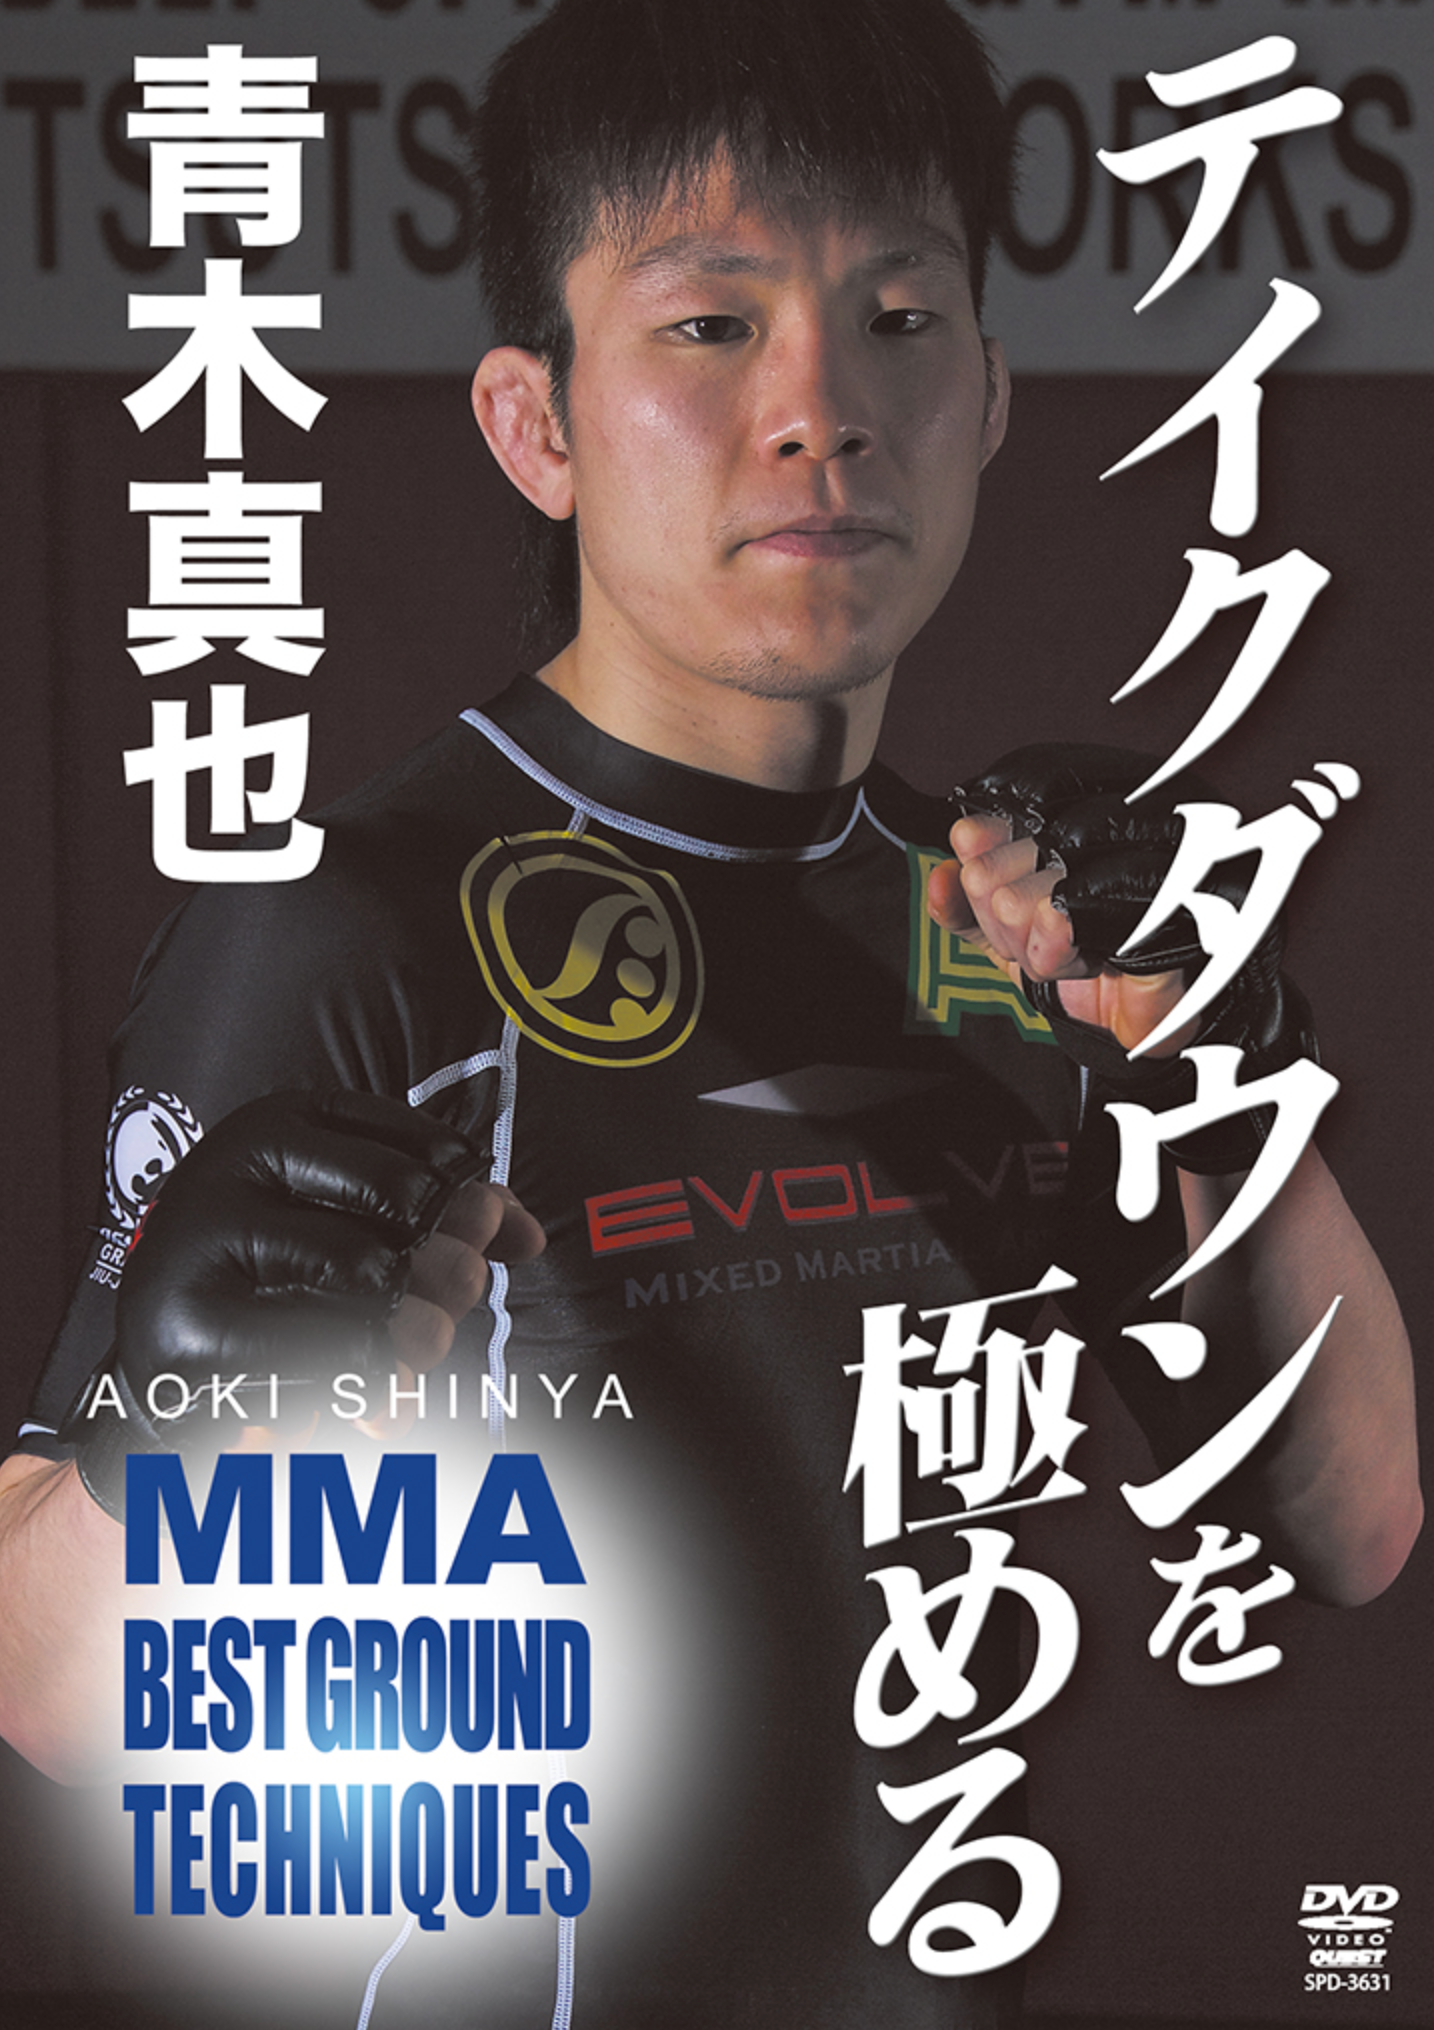 MMA Best Ground Techniques (Takedown and Finish) DVD with Shinya Aoki - Budovideos Inc